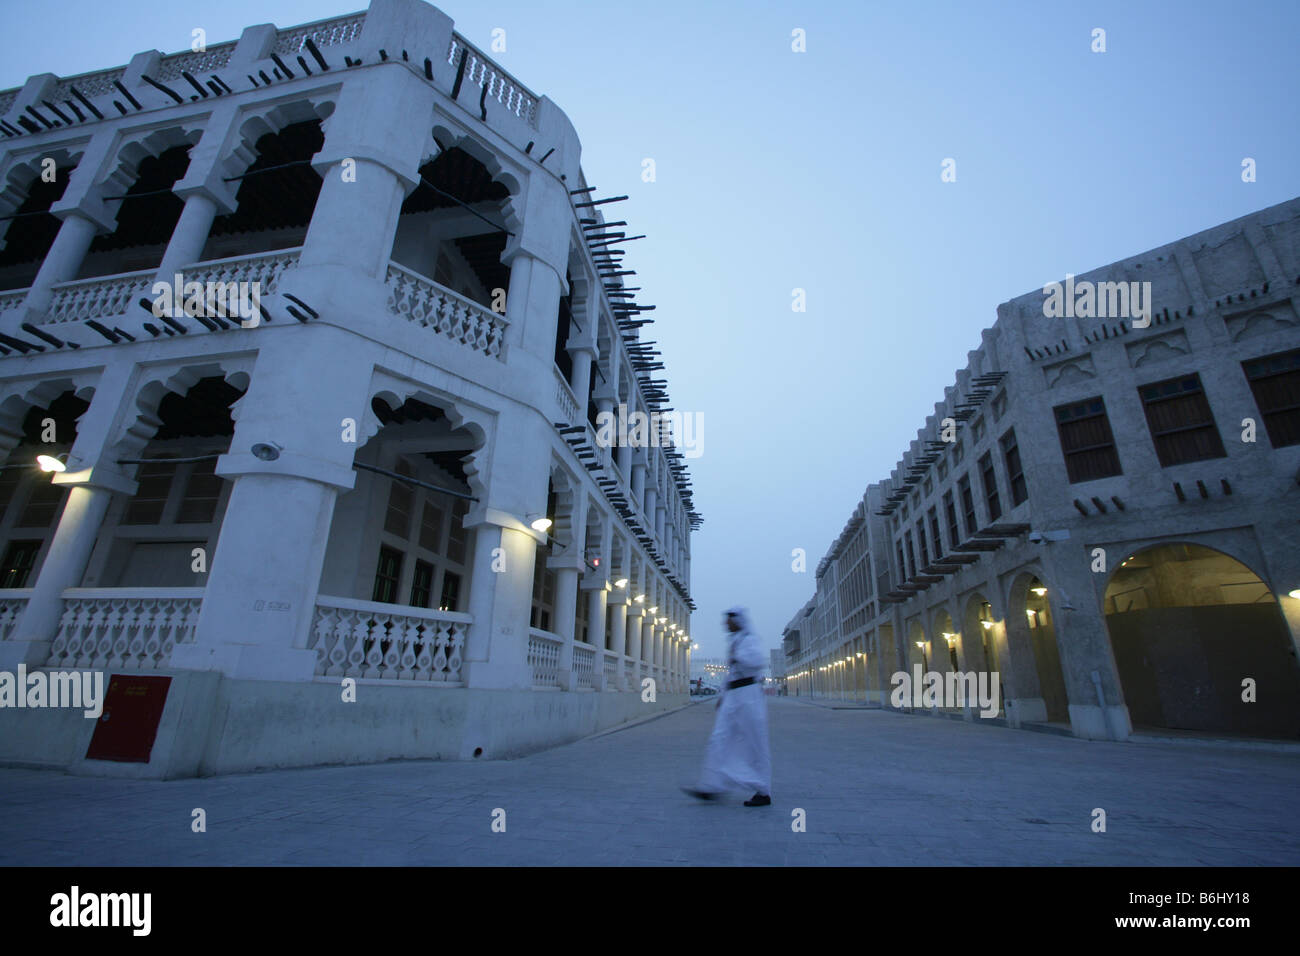 Man walking past traditional whitewash buildings at Souq Waqif market with protruding 'shandal' beams at dusk, Doha, Qatar, Middle East Stock Photo